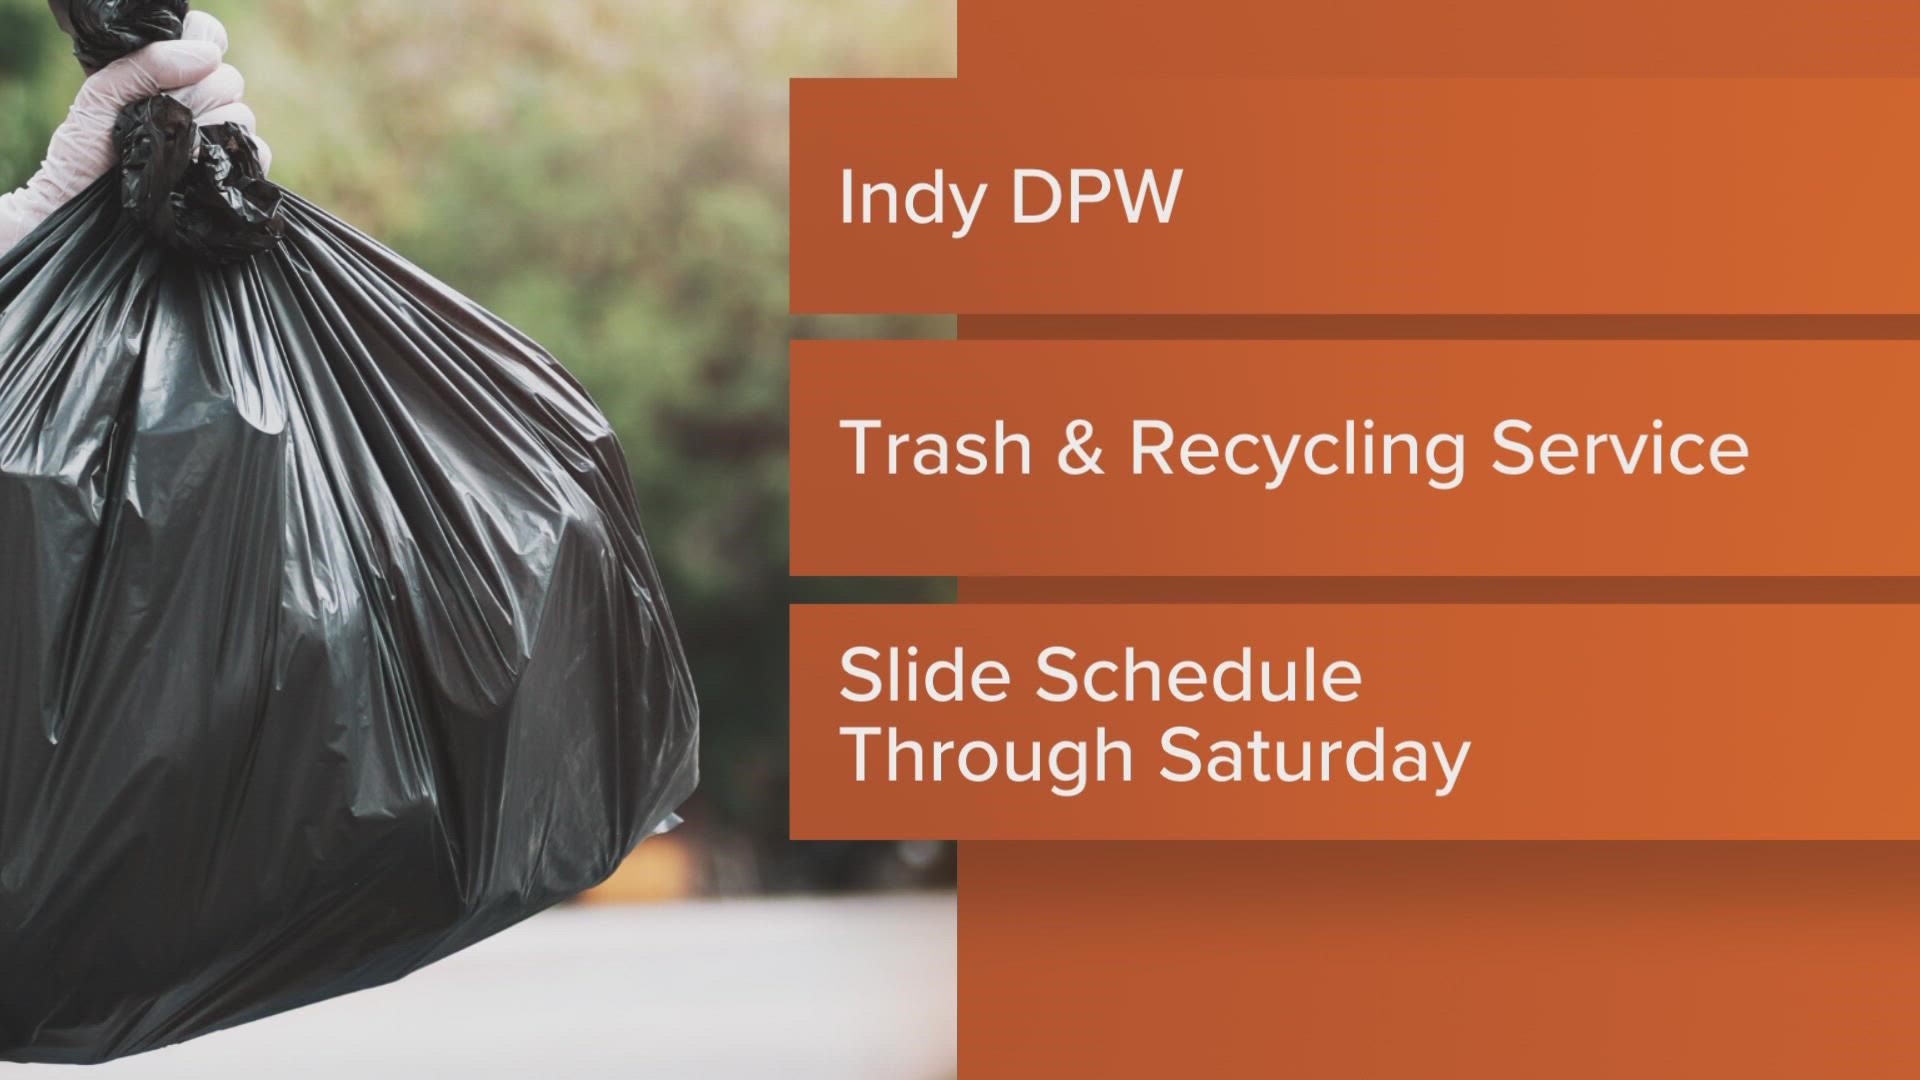 Curbside recycling, residential and heavy trash will slide forward one day after the holiday.